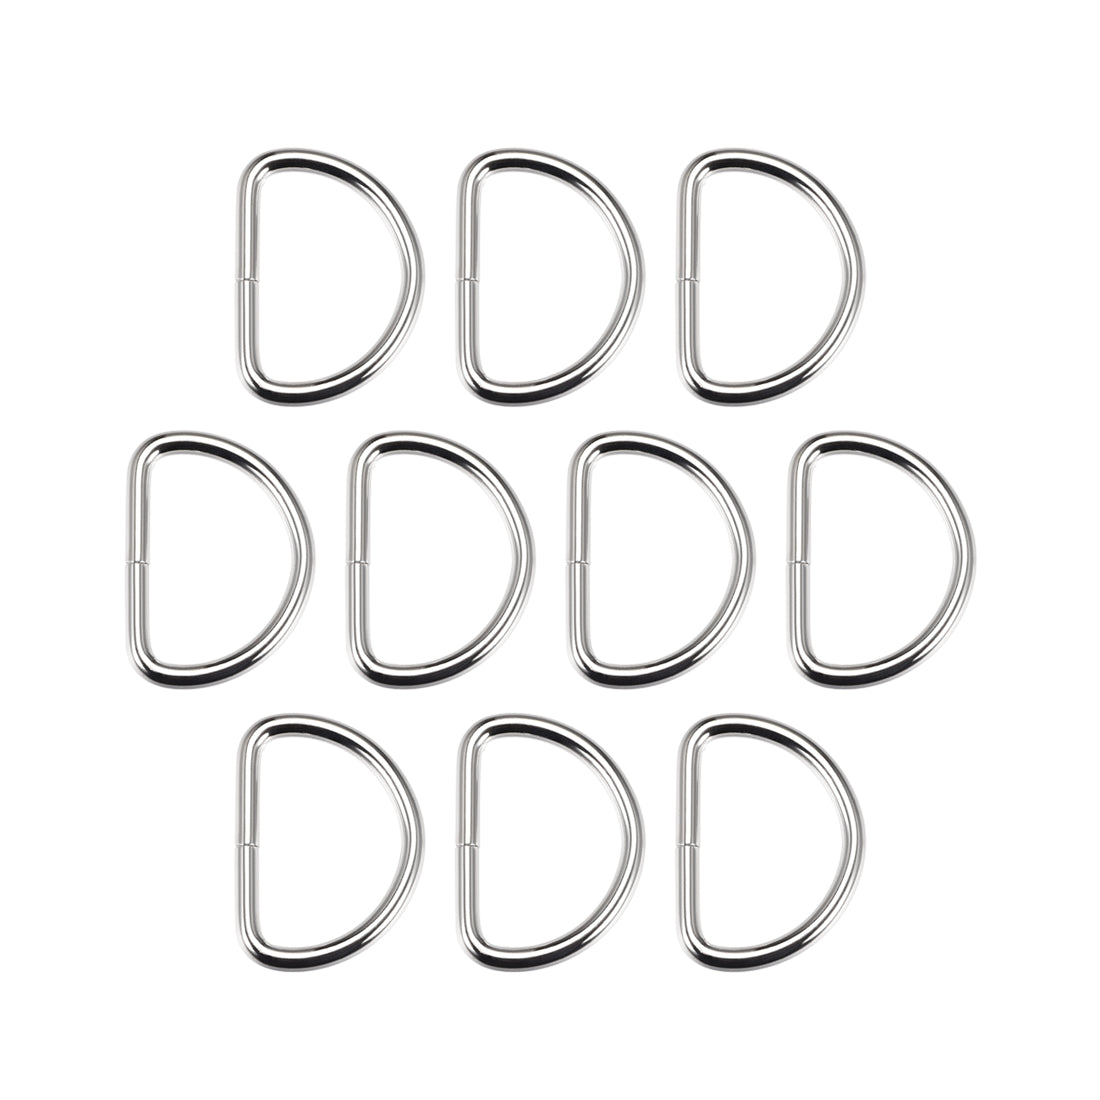 uxcell Uxcell 10 Pcs D Ring Buckle 1.6 Inch Metal Semi-Circular D-Rings Silver Tone for Hardware Bags Belts Craft DIY Accessories